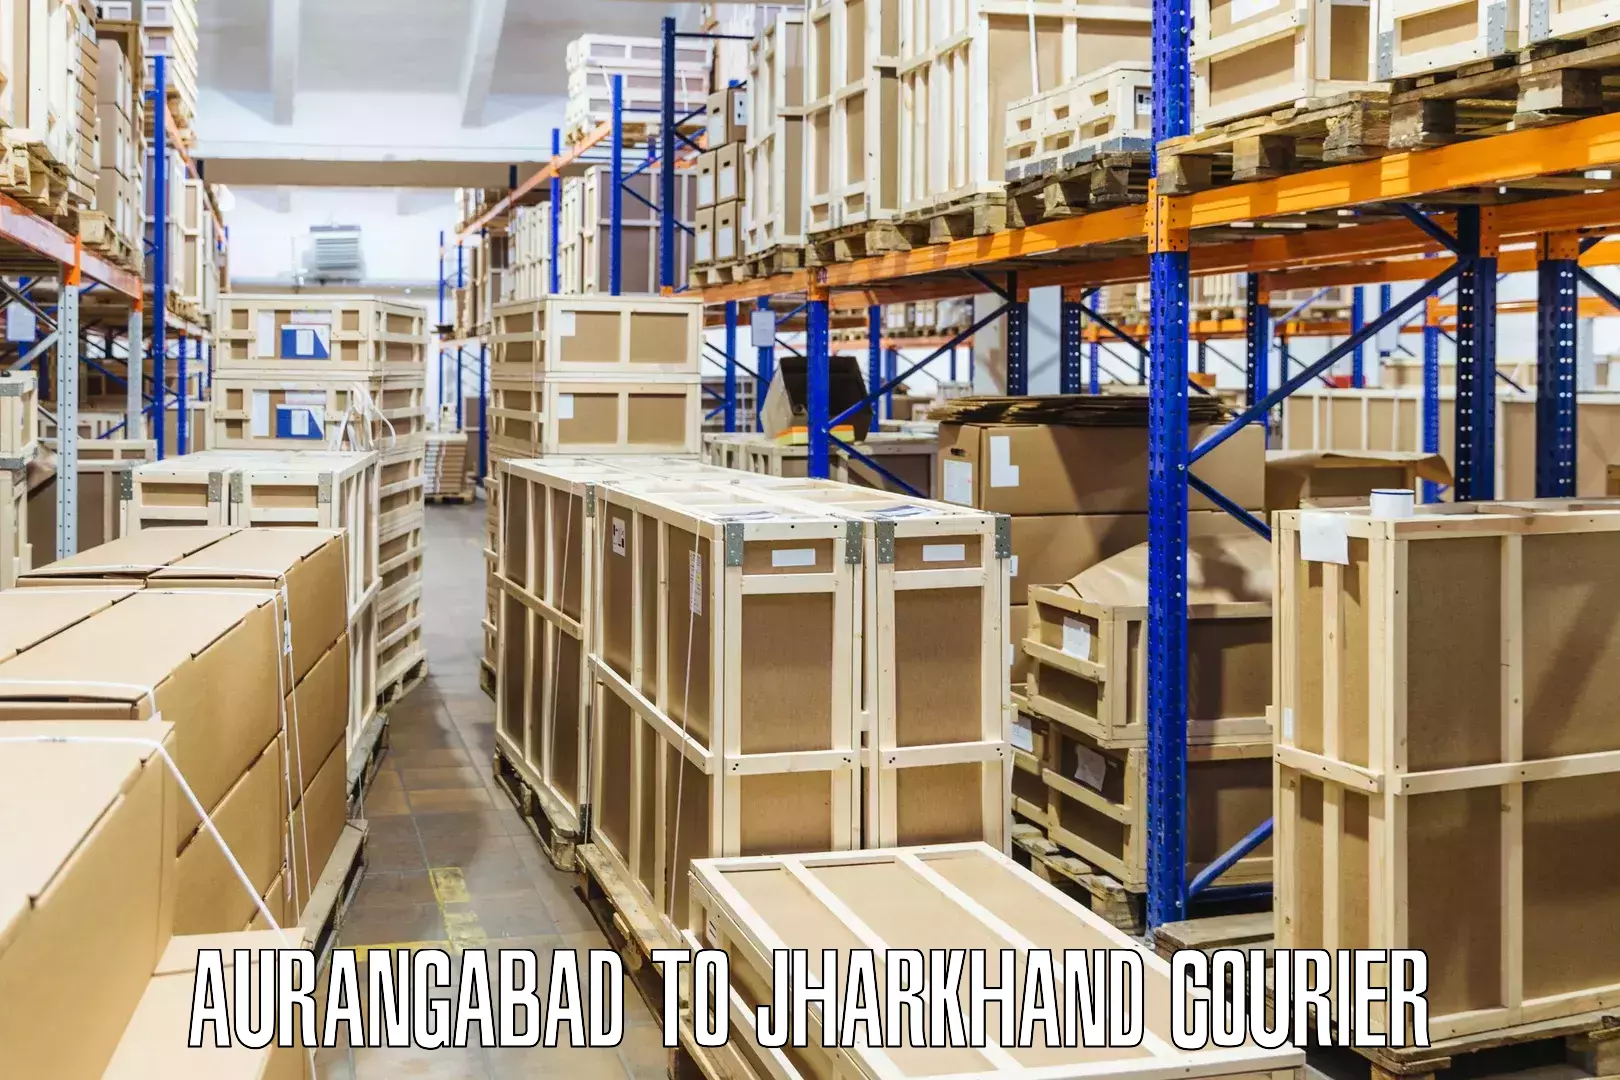 Round-the-clock parcel delivery Aurangabad to Shikaripara